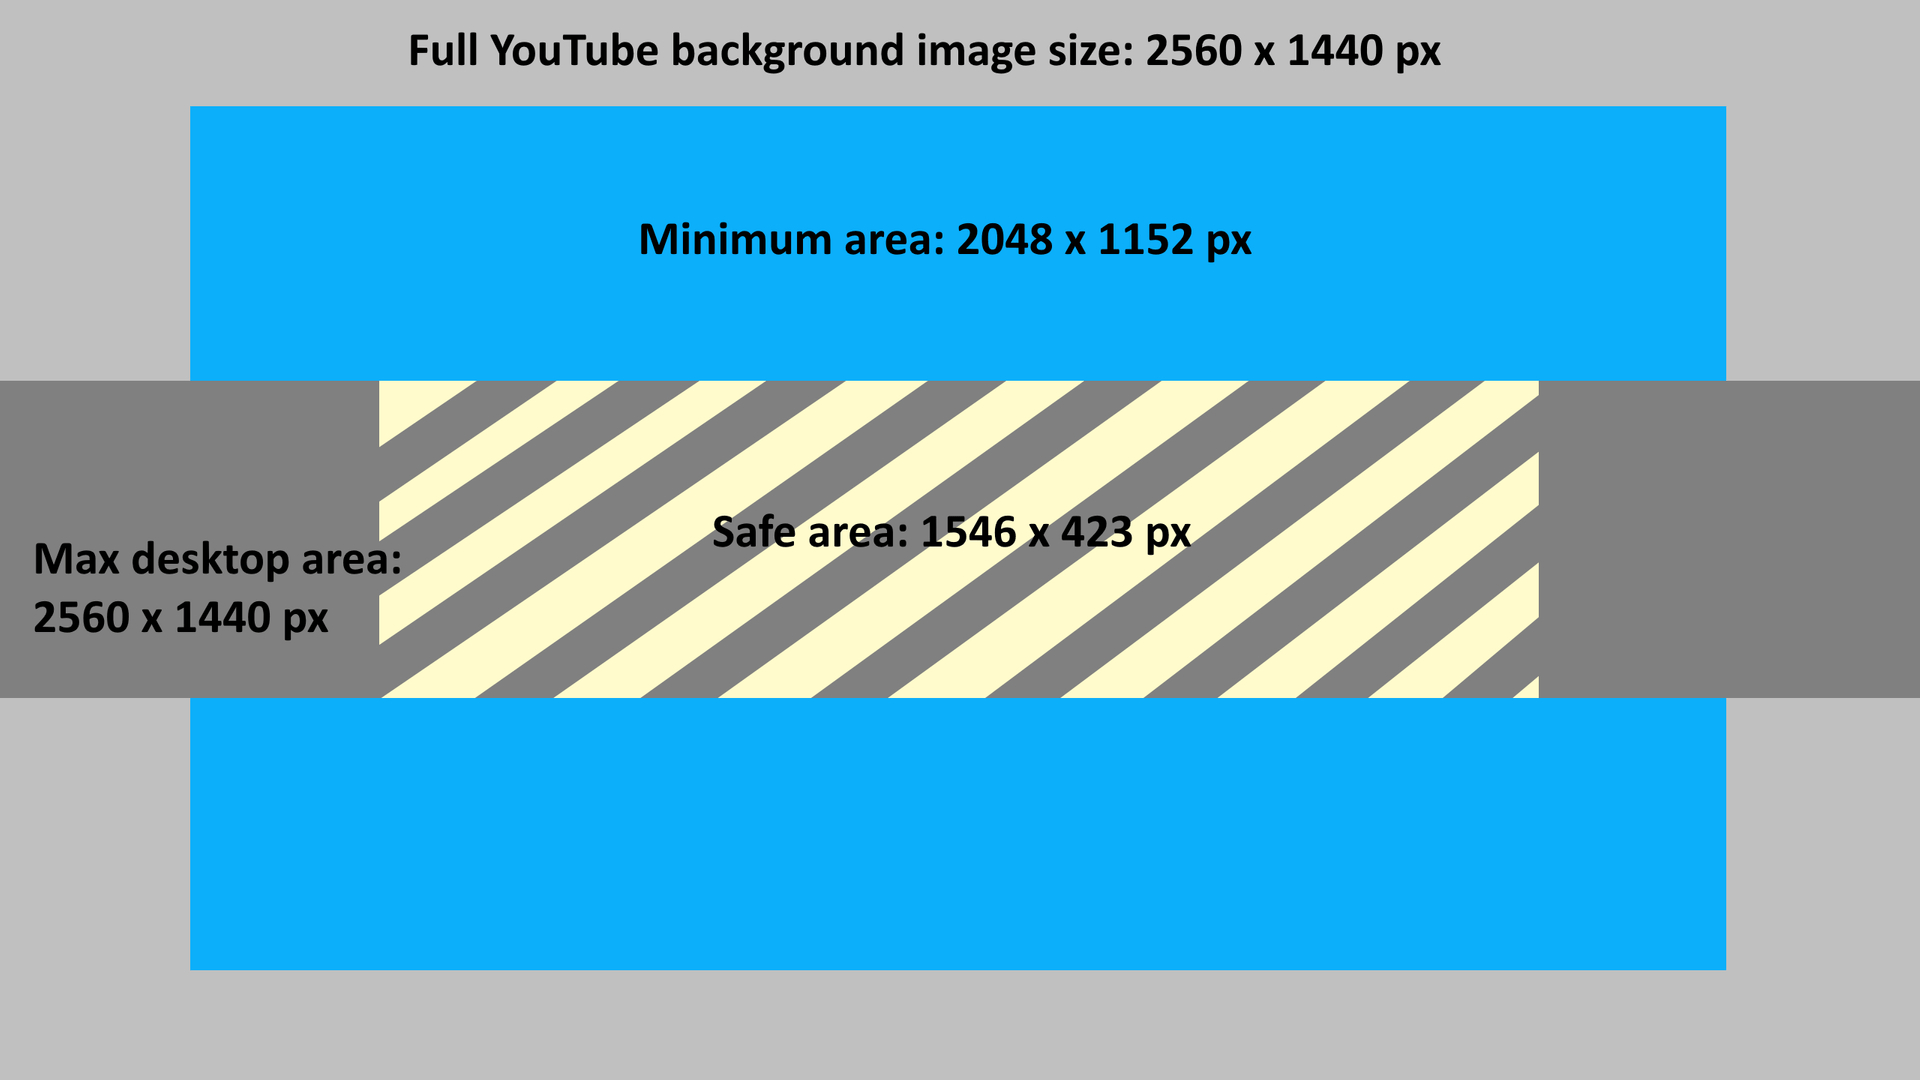 The Best Youtube Banner Size In 2020 + Best Practices For With Regard To Youtube Banner Size Template